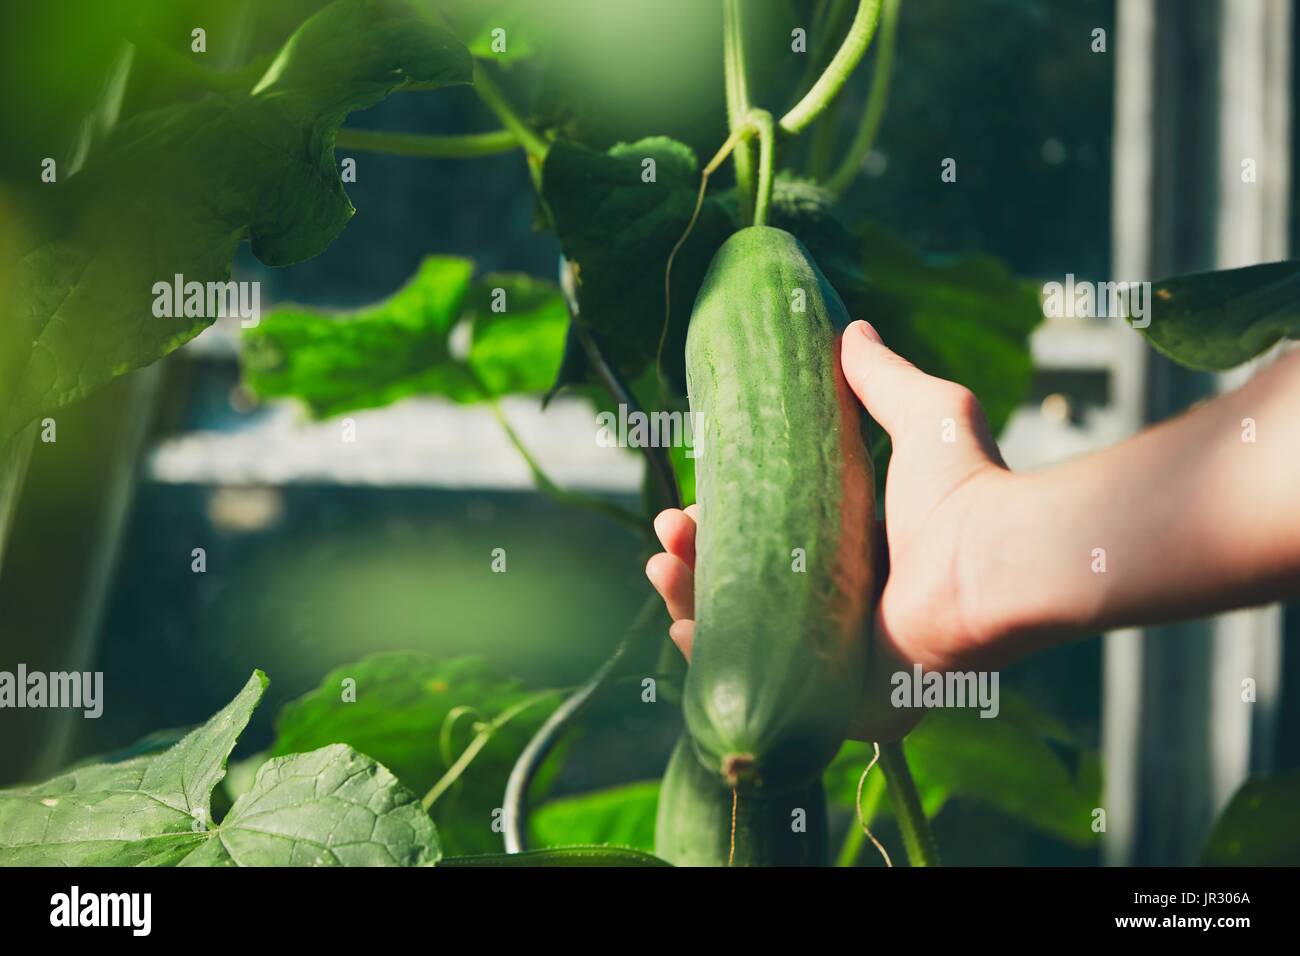 Harvest of freshness vegetables. Young gardener holding a cucumber. Stock Photo